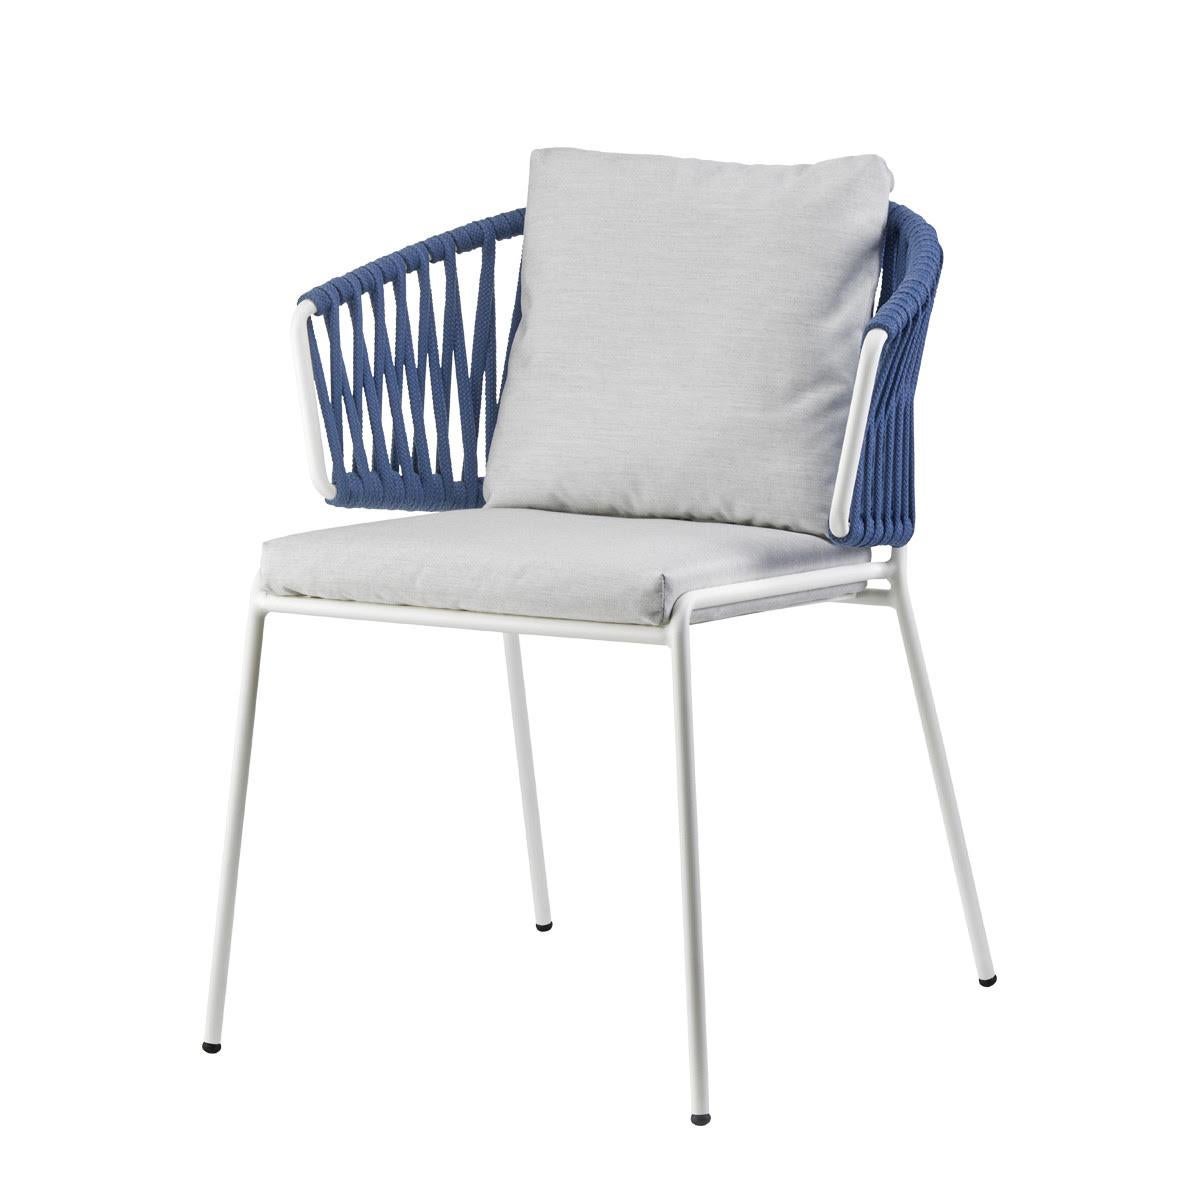 French Pair of Blue Outdoor or Indoor Metal and Cord Armchairs, 21 century For Sale